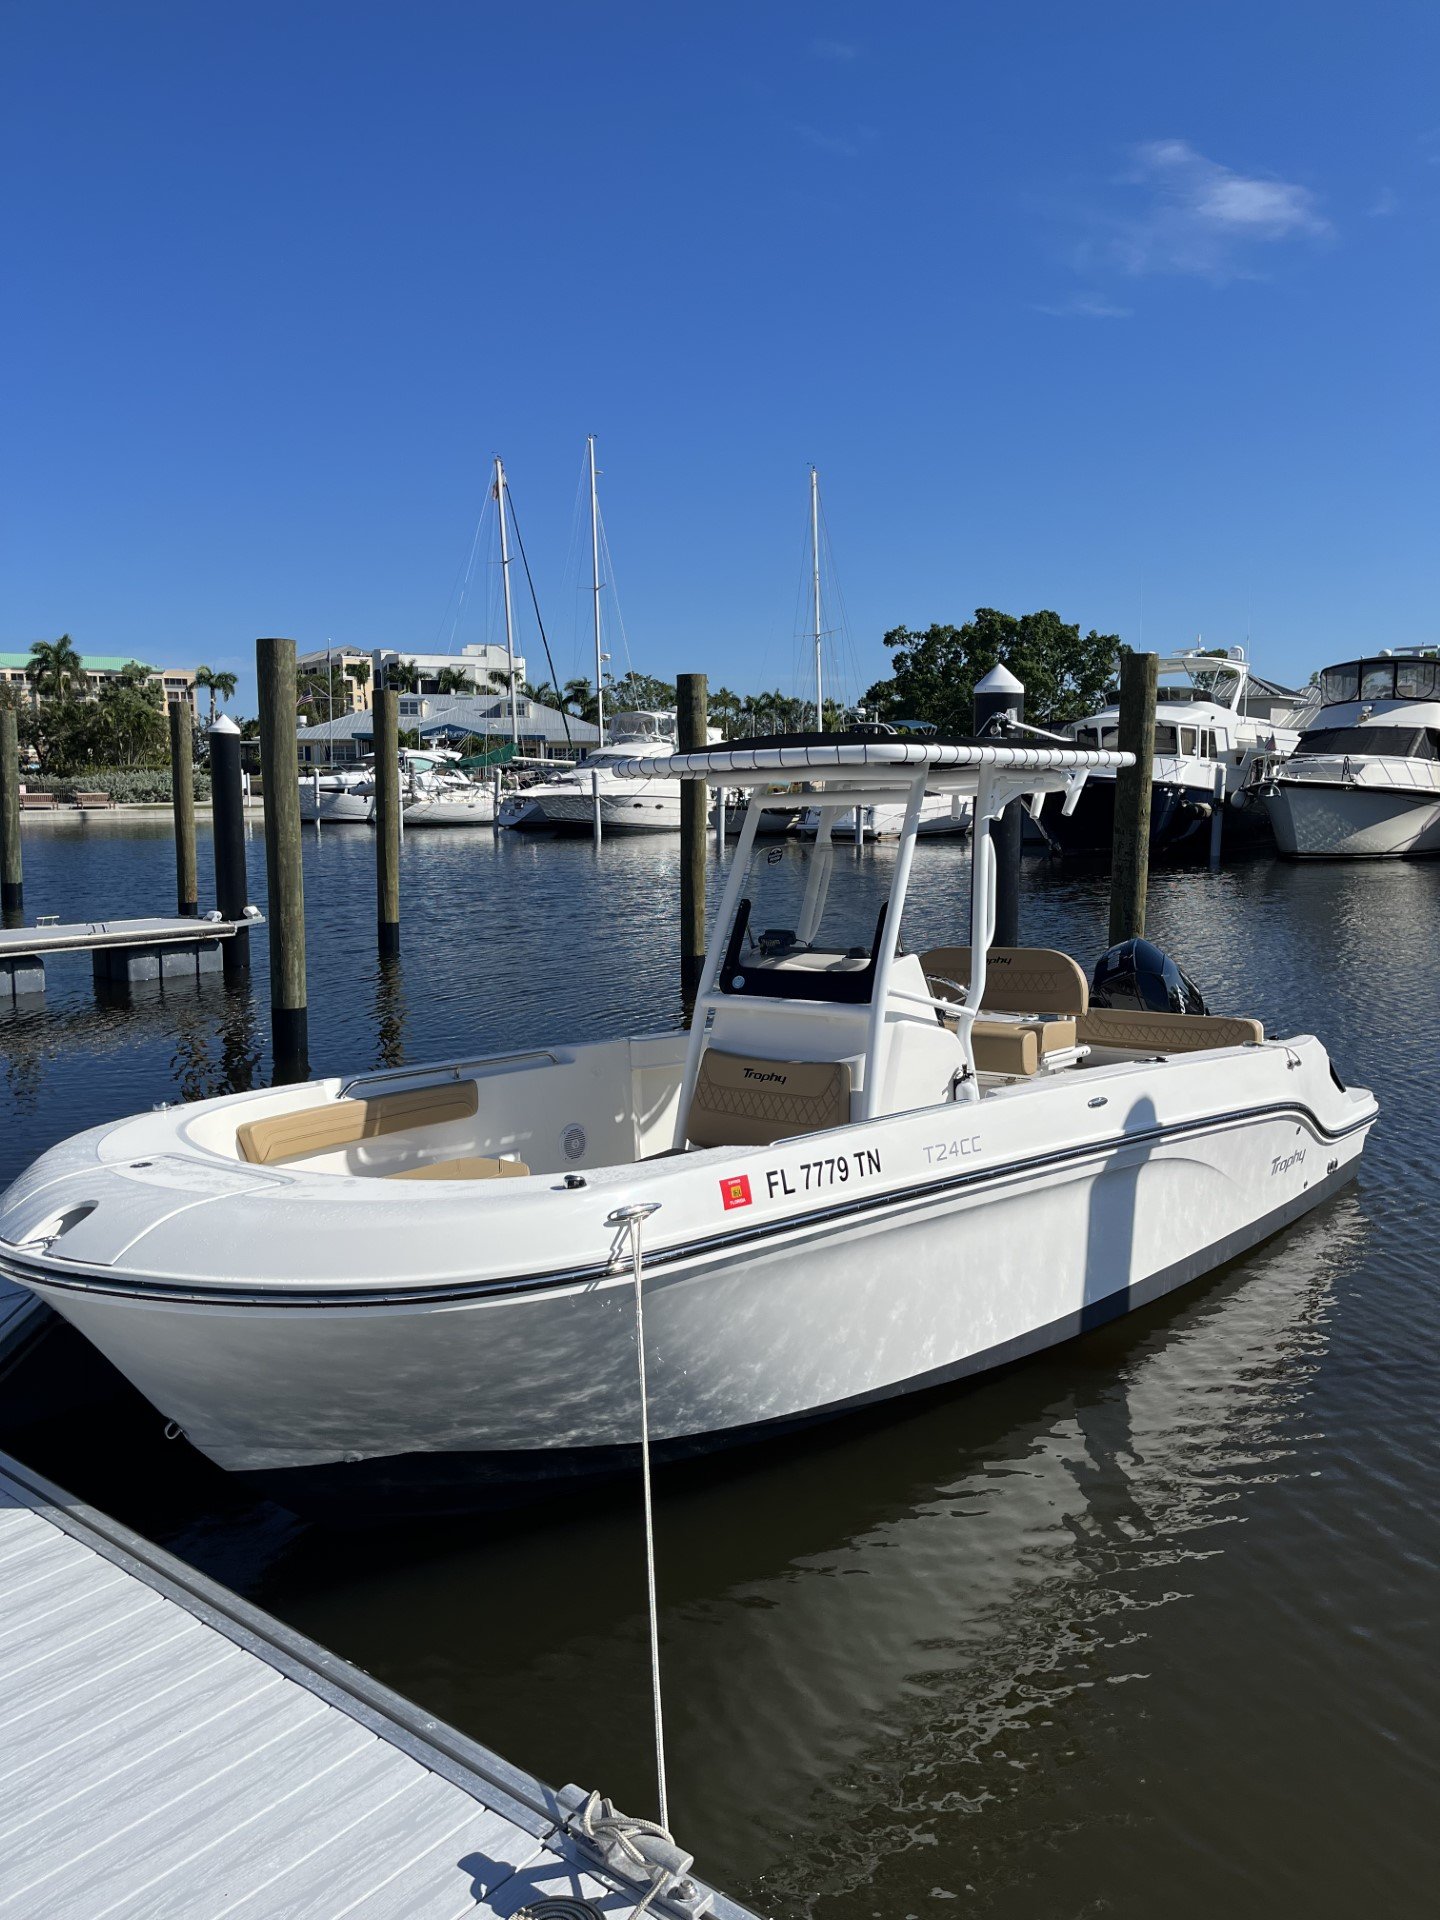 BIG CHEESE  (24FT Bayliner Trophy Offshore  Ctr Console - 250 HP~Fish)